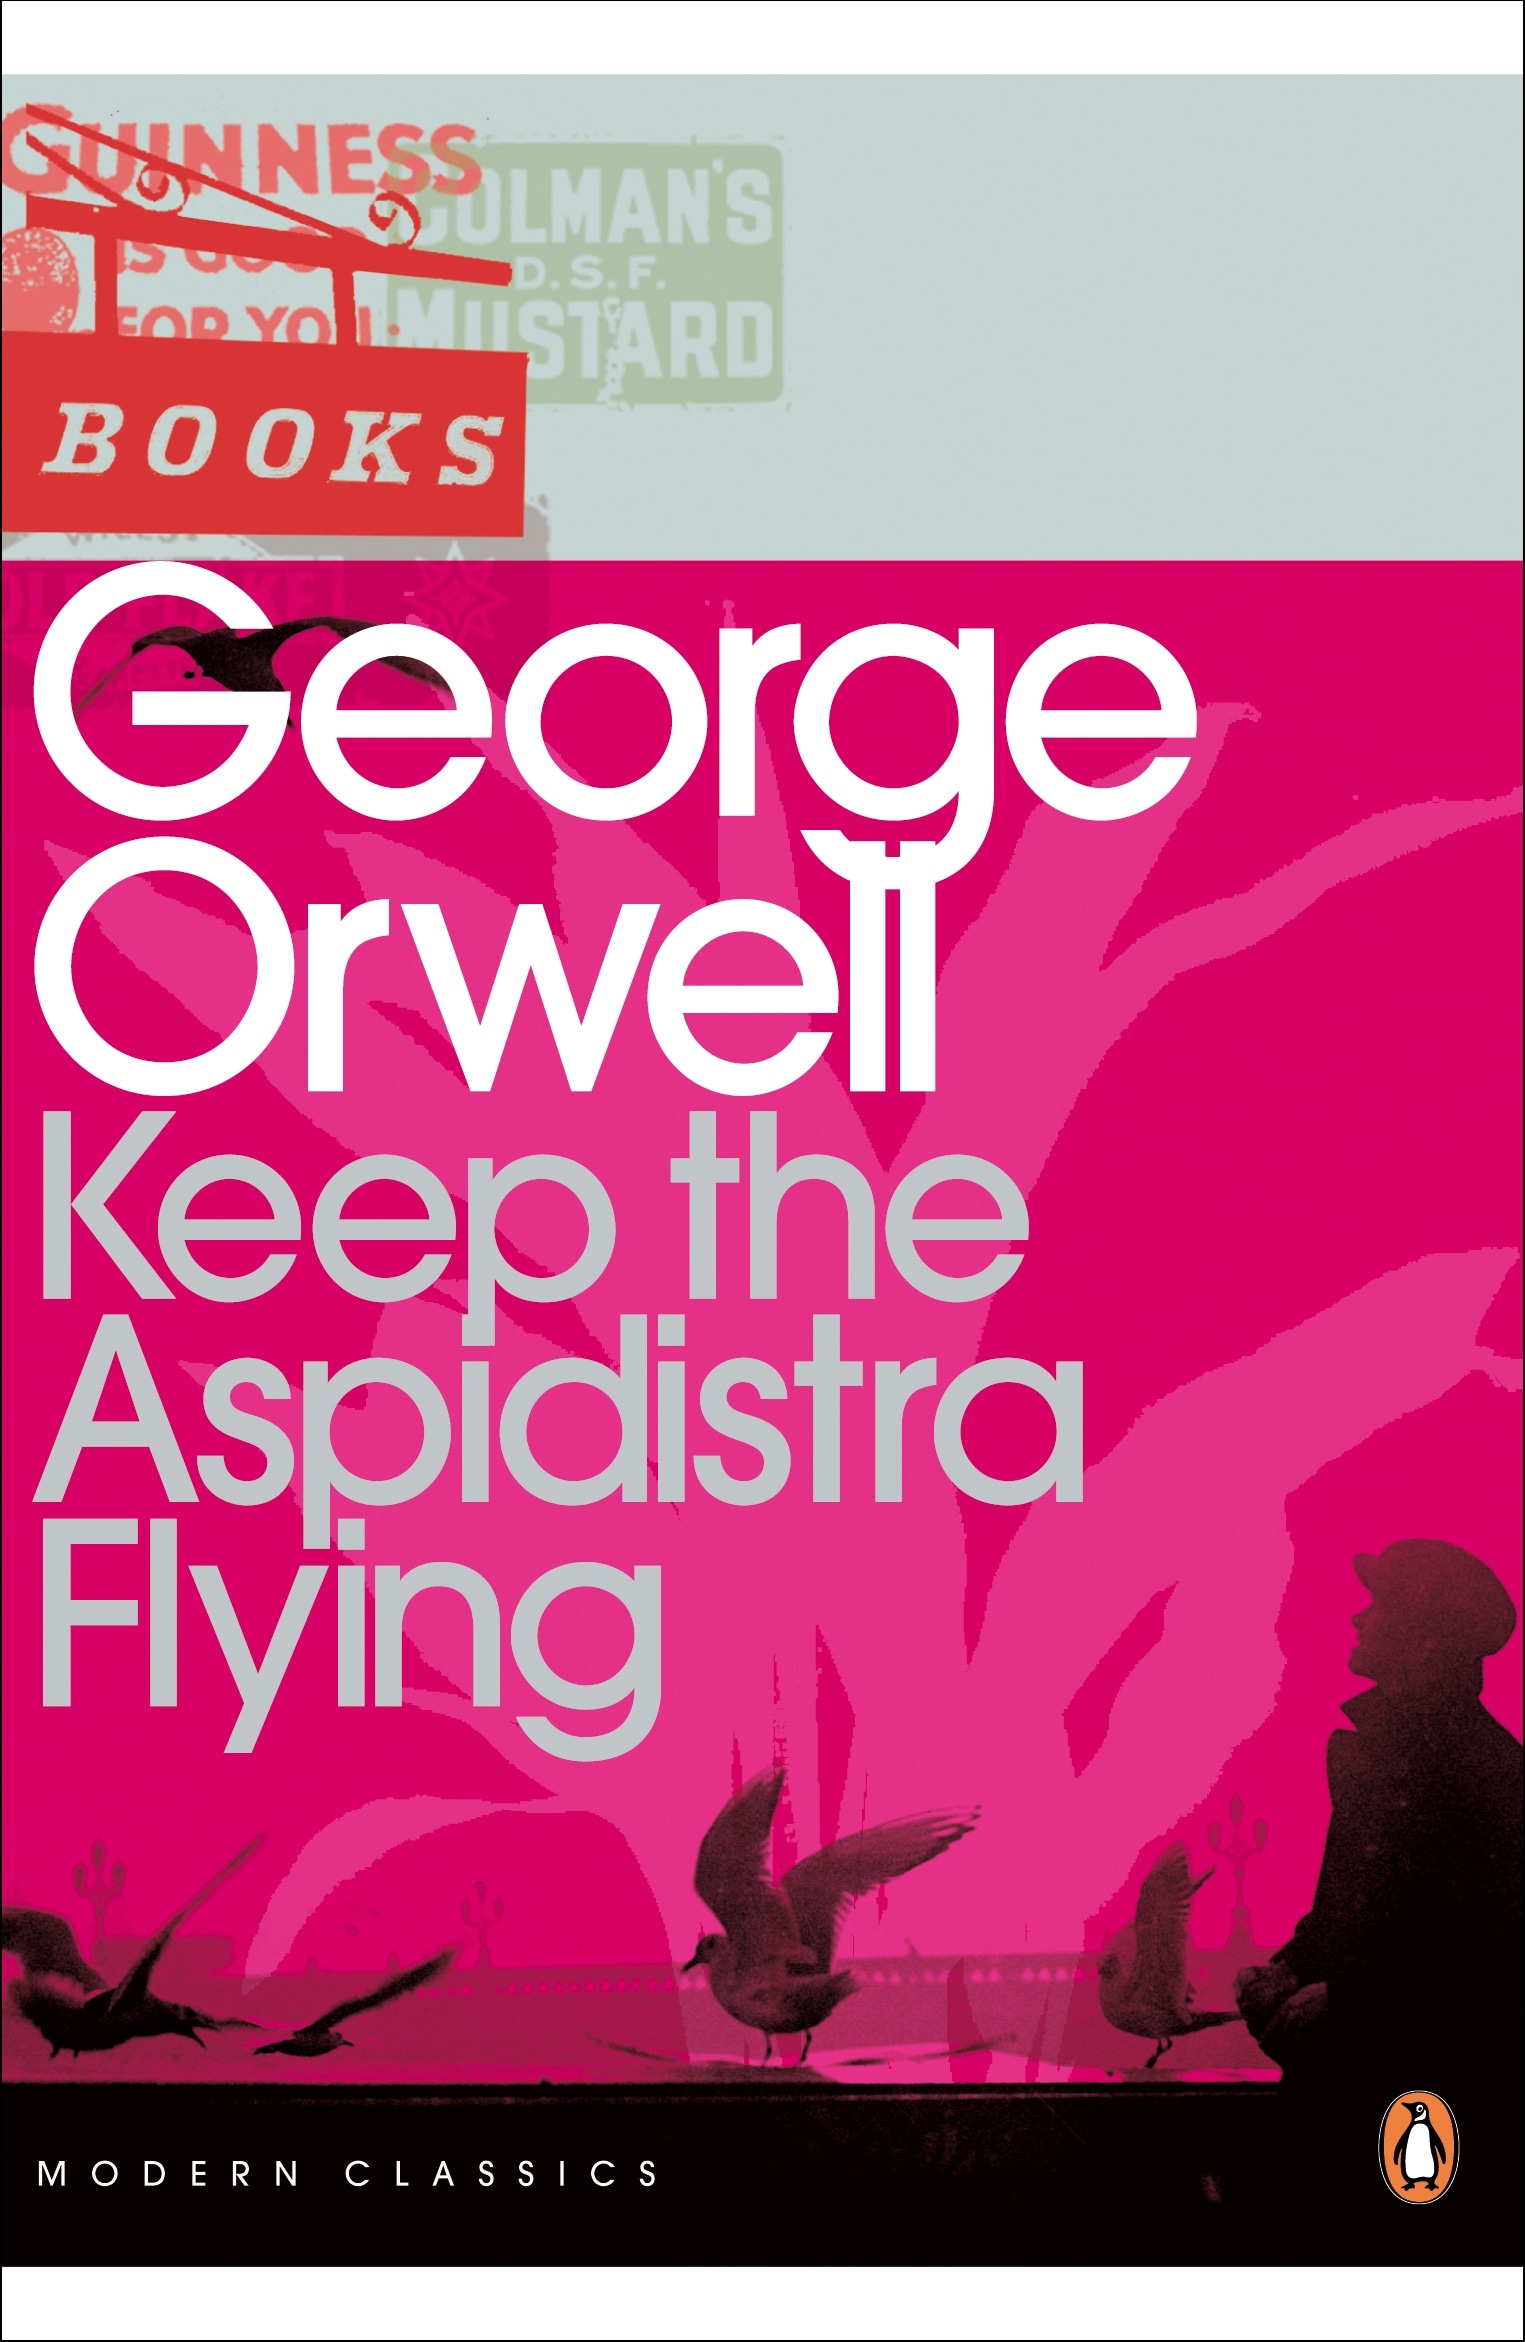 Book “Keep the Aspidistra Flying” by George Orwell — October 26, 2000